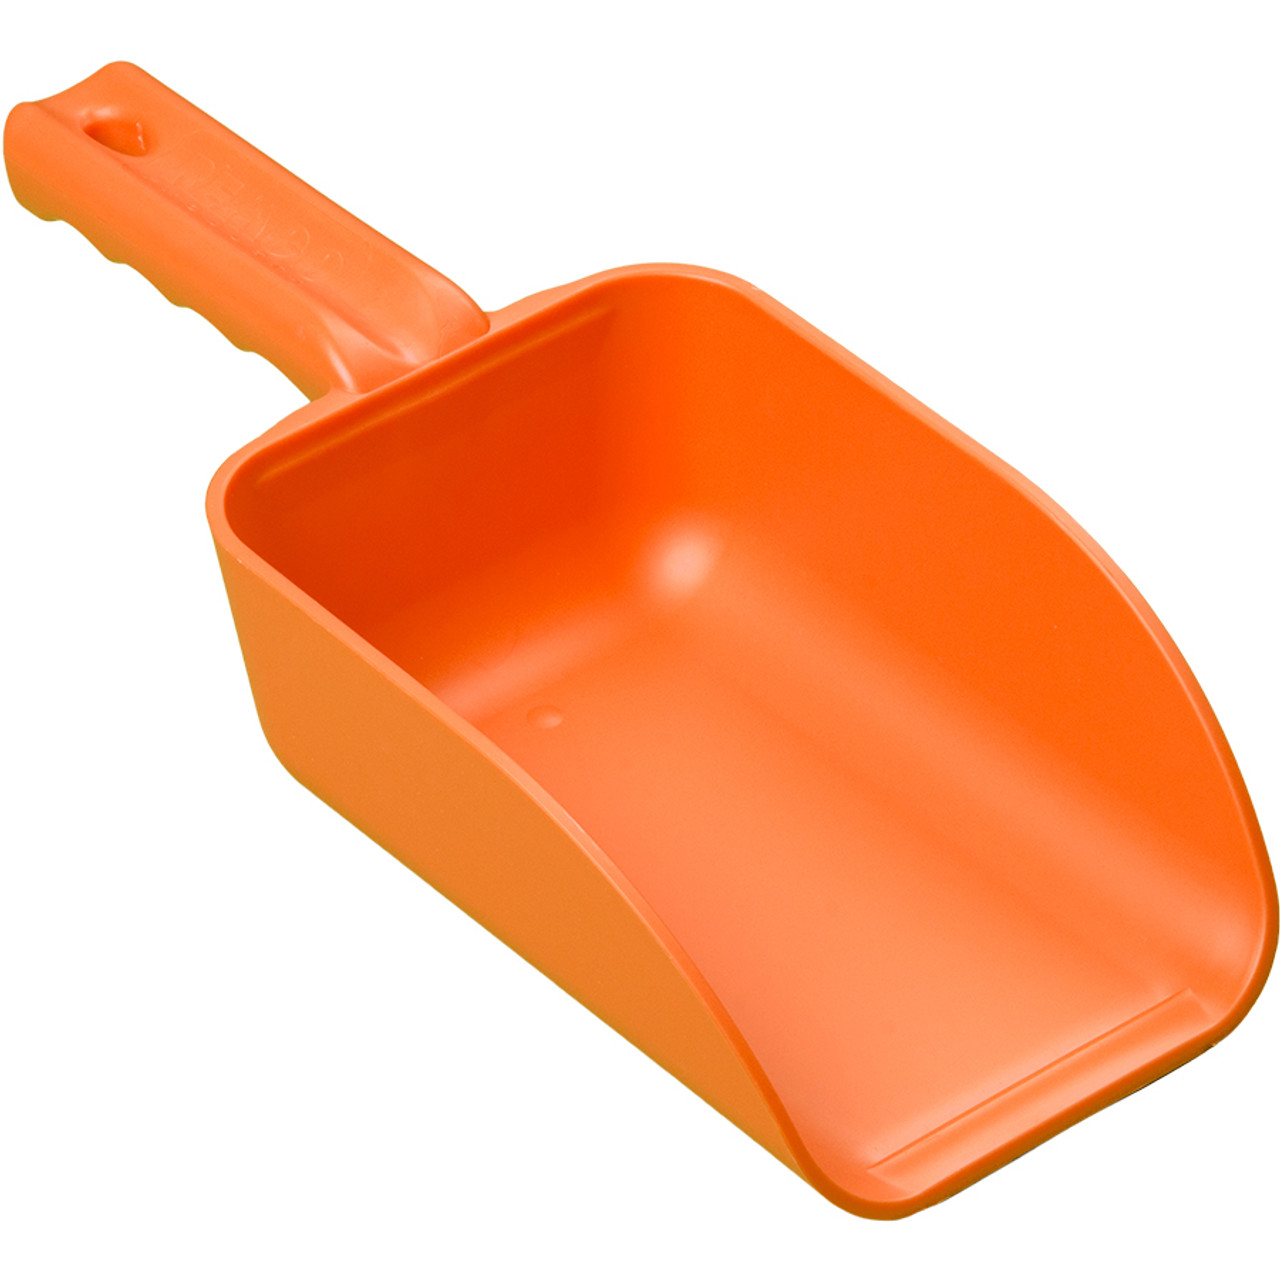 Stainless Steel and Plastic Hand Scoops for Agriculture Industry